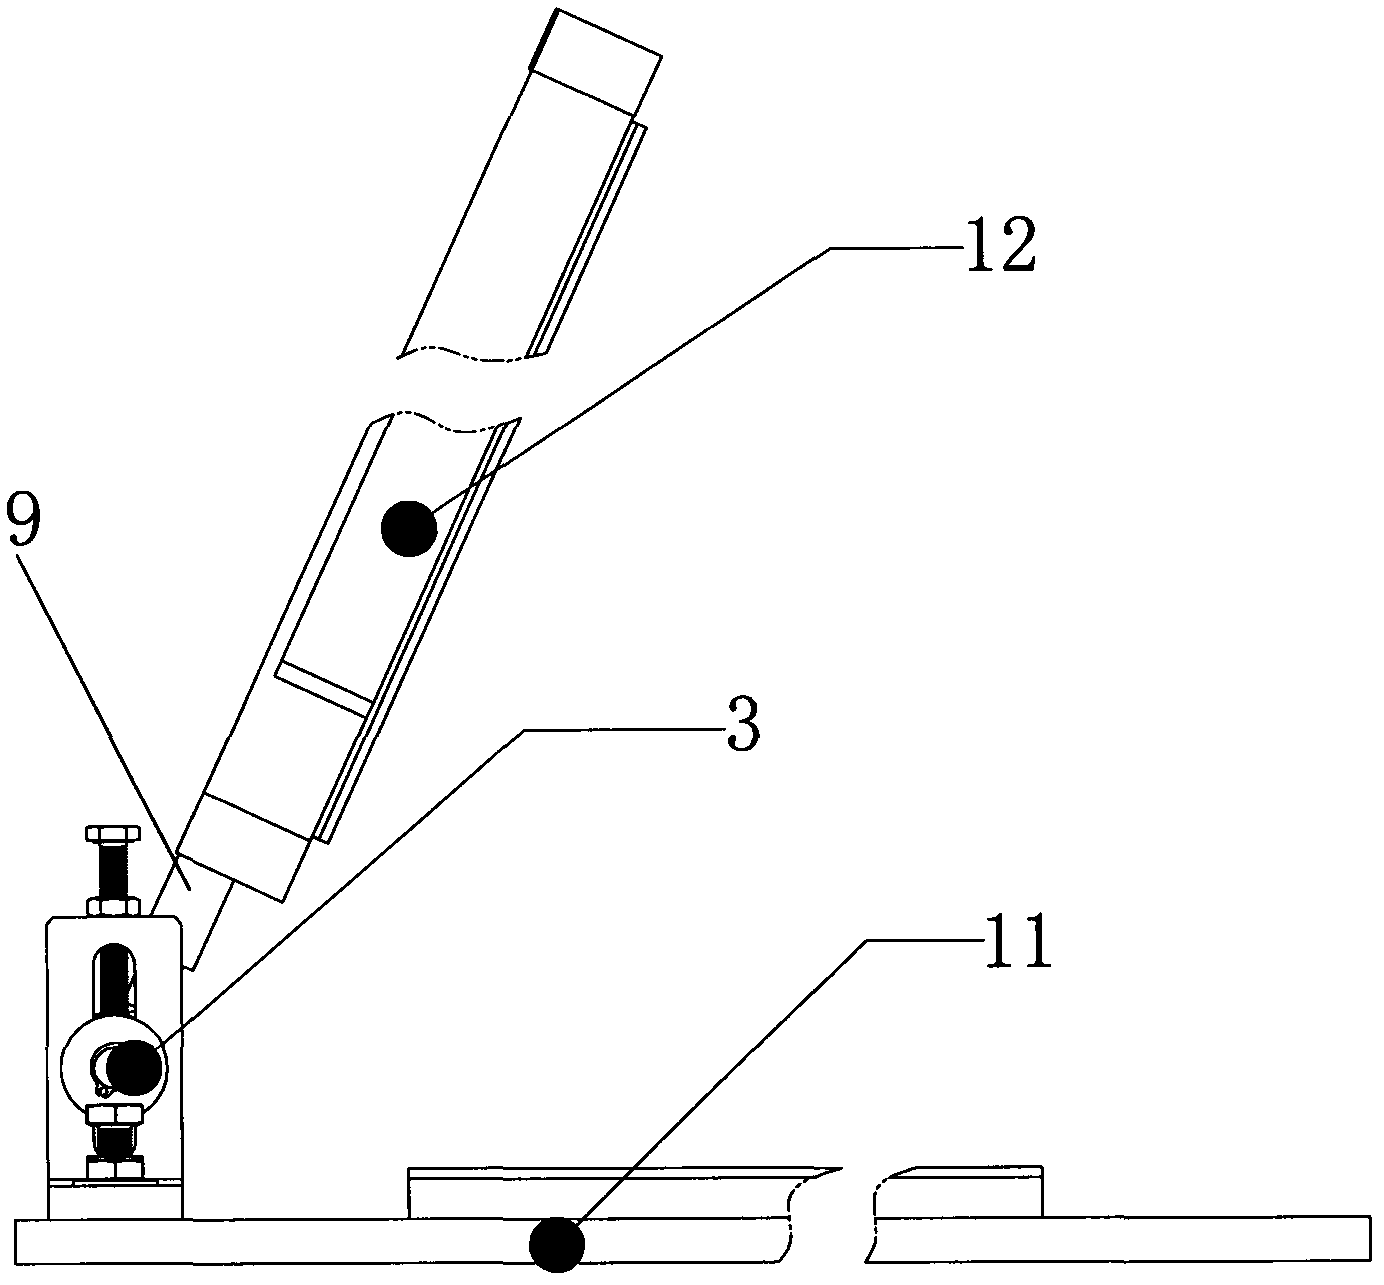 Compressing frame device for level delivering and stamping of fabric